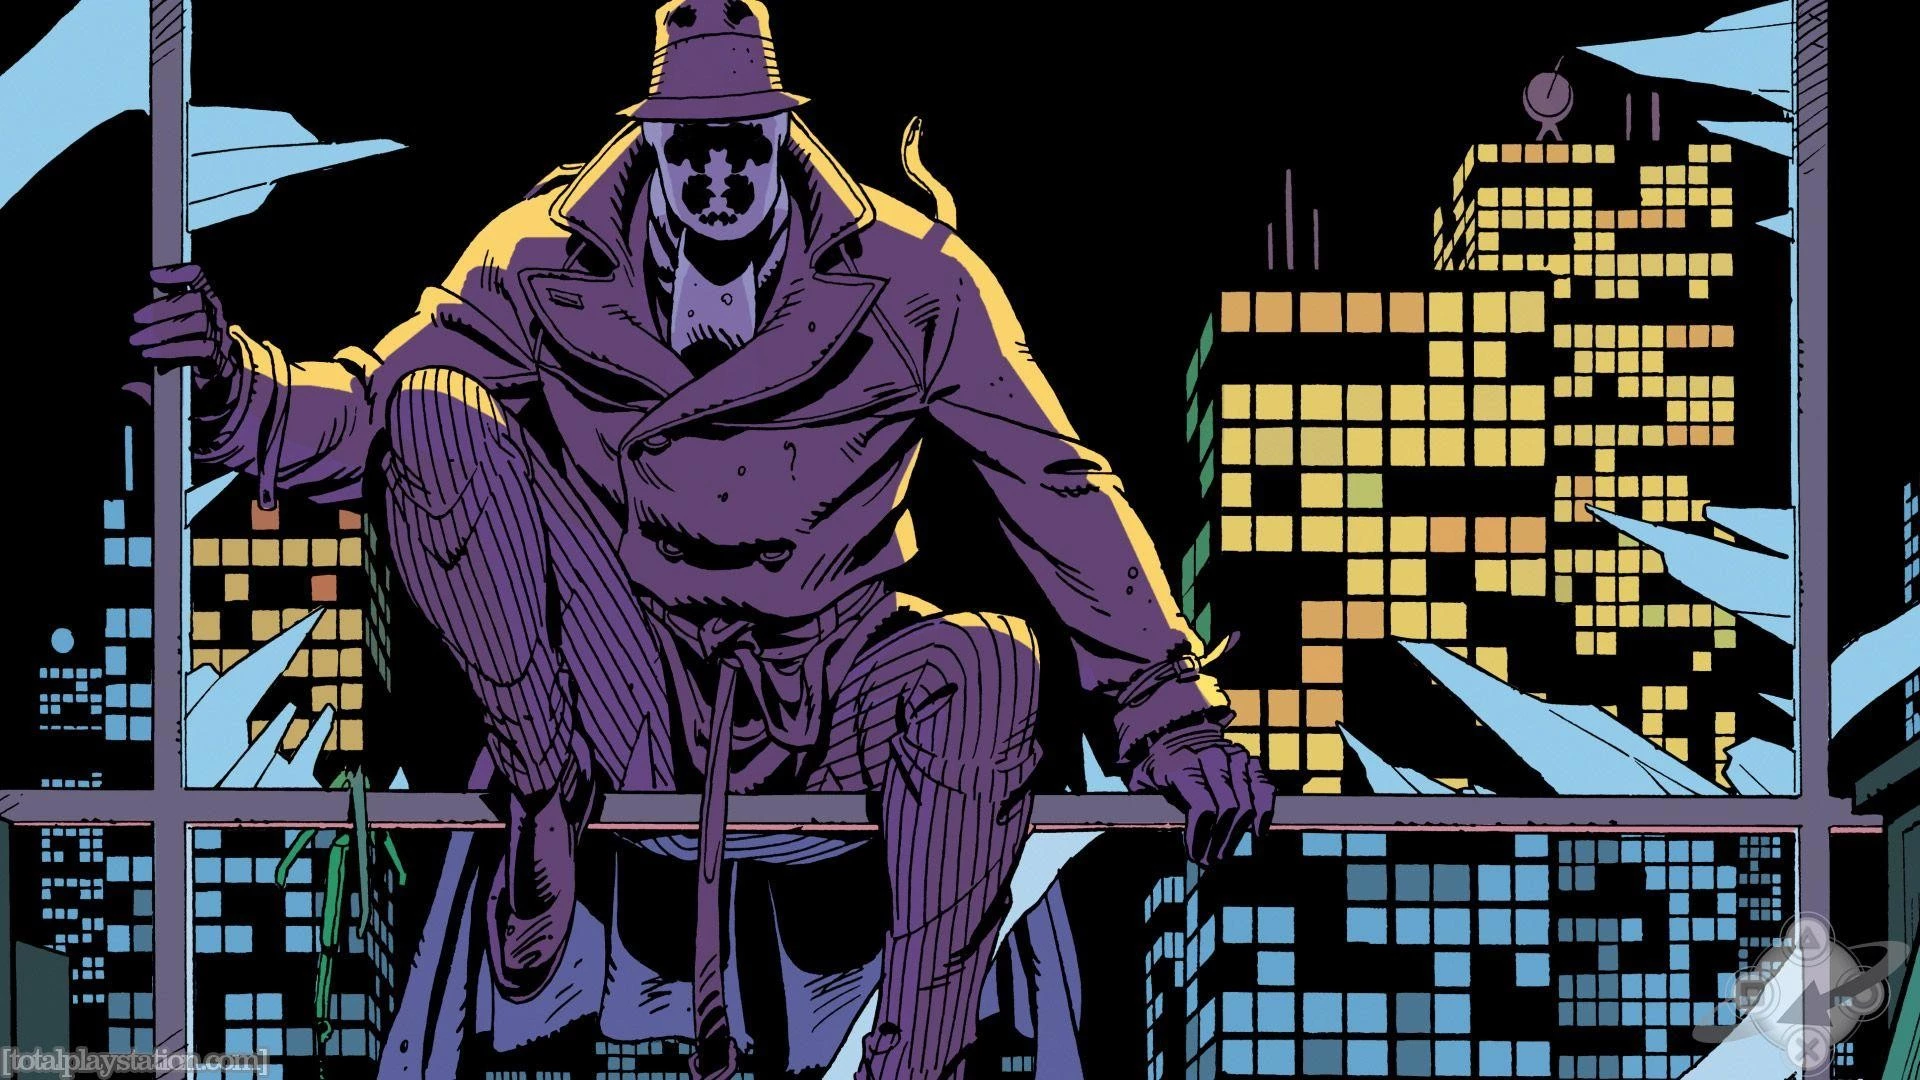 Rorschach from the comic "Watchmen"_.